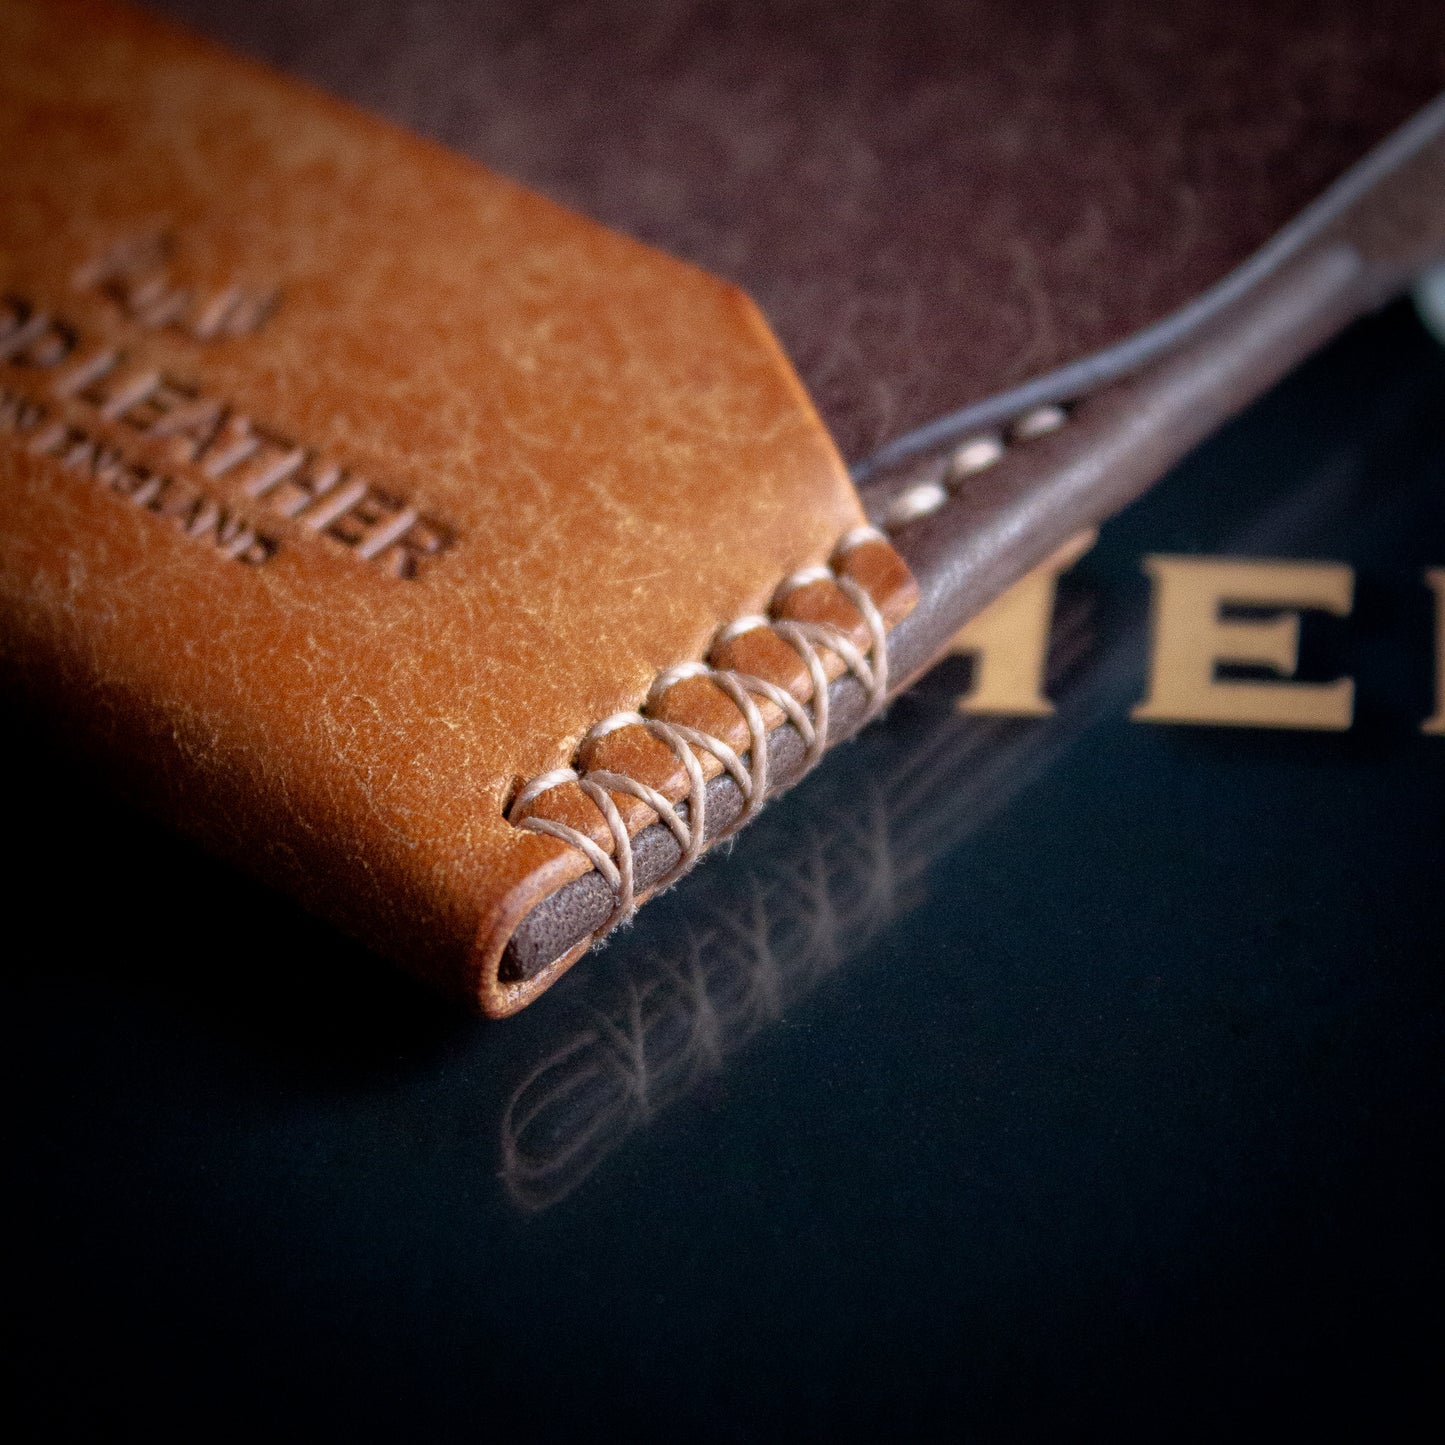 Elkwood Leather - The Blackthorn - EDC Flap full grain Italian Pueblo leather cardholder wallet open close up of pockets on wooden table next to brown leather baseball - close up saddle stitching